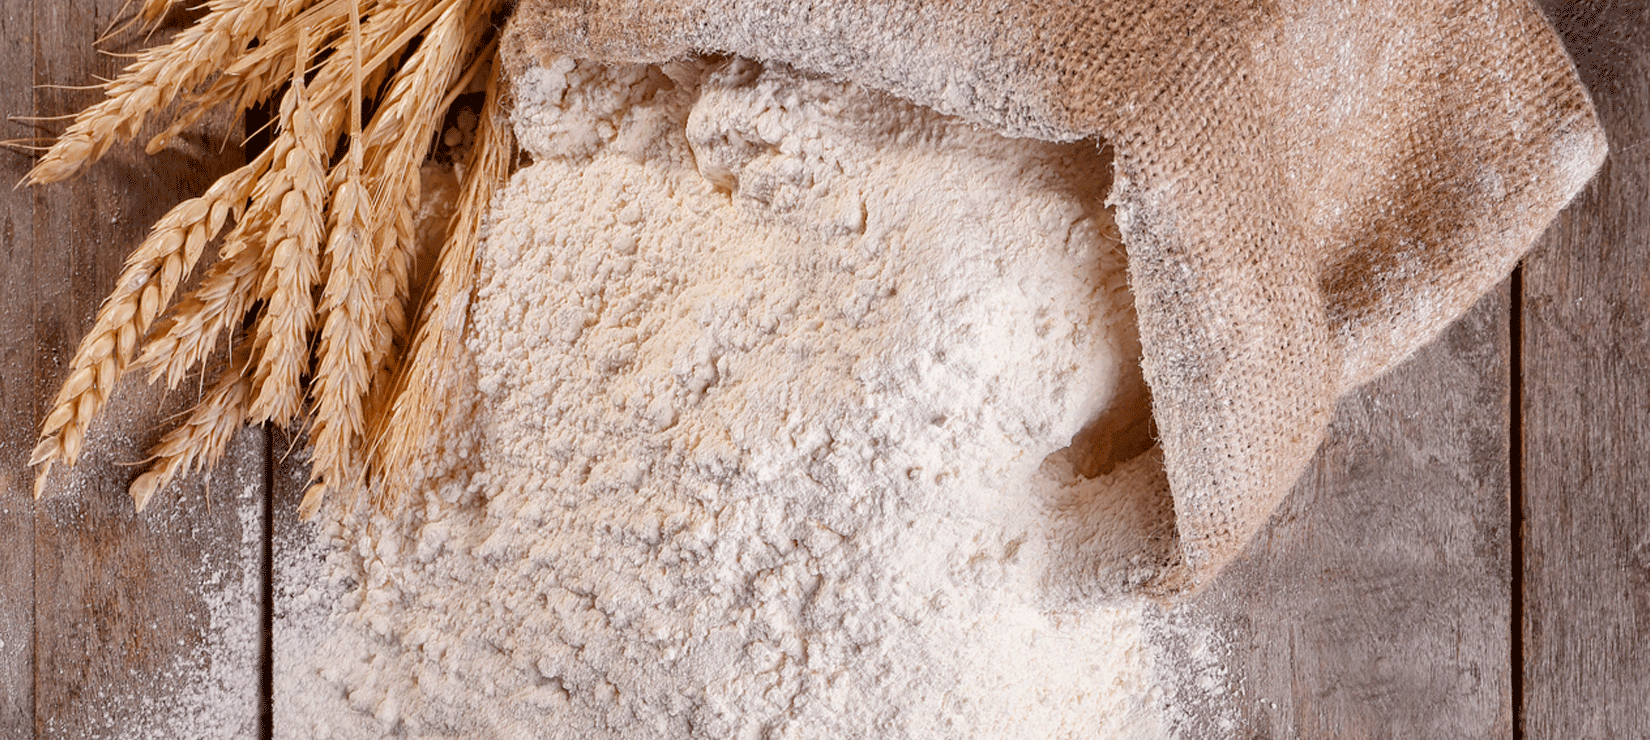 Transporting flour in perfect condition with MSC